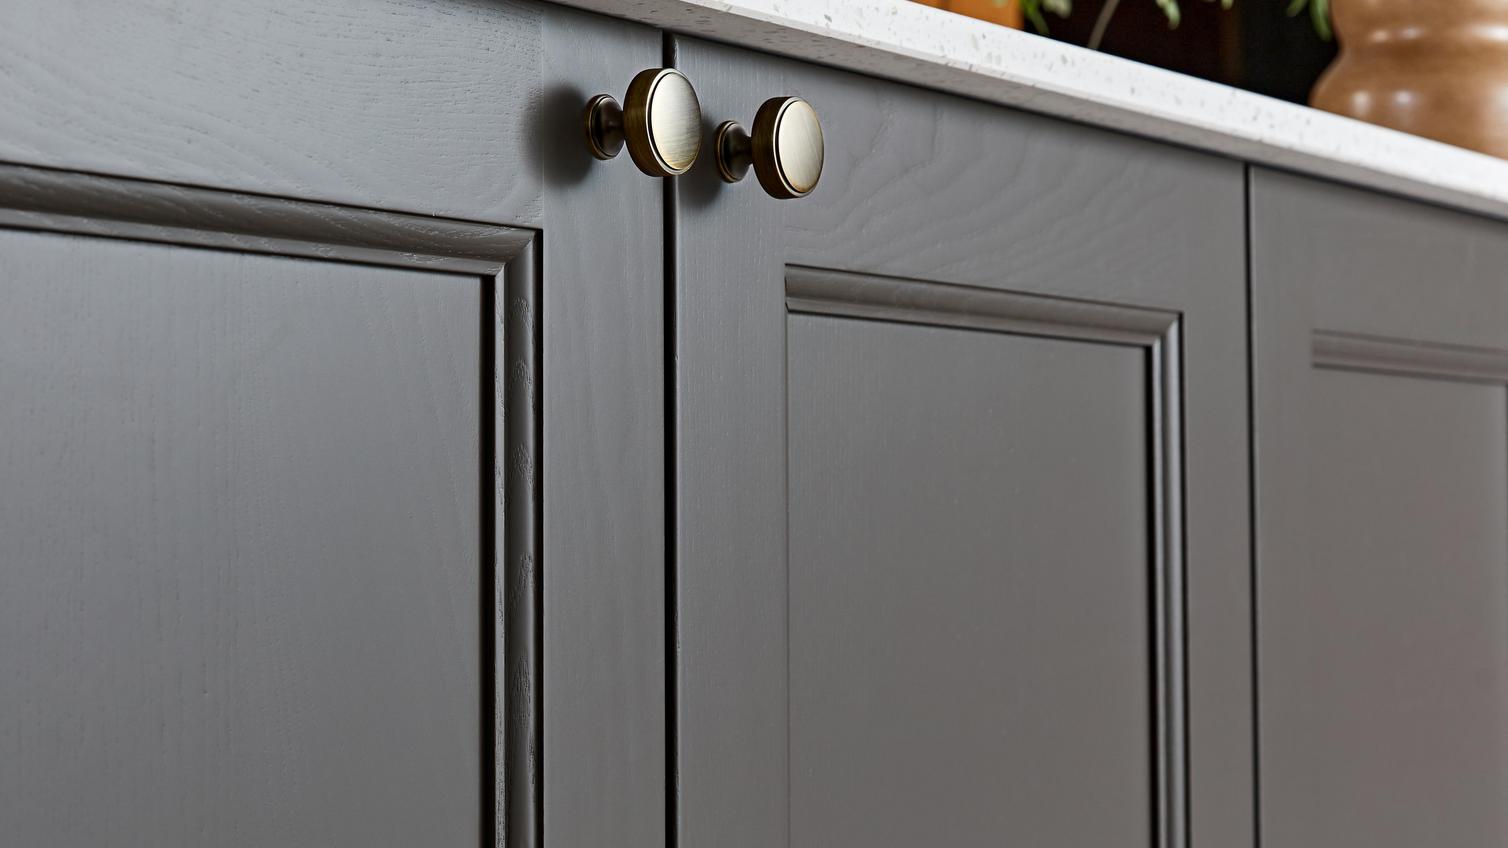 Shaker kitchen doors with a grained finish and a truffle-toned brown colour. It also has round, brass cabinet knobs.